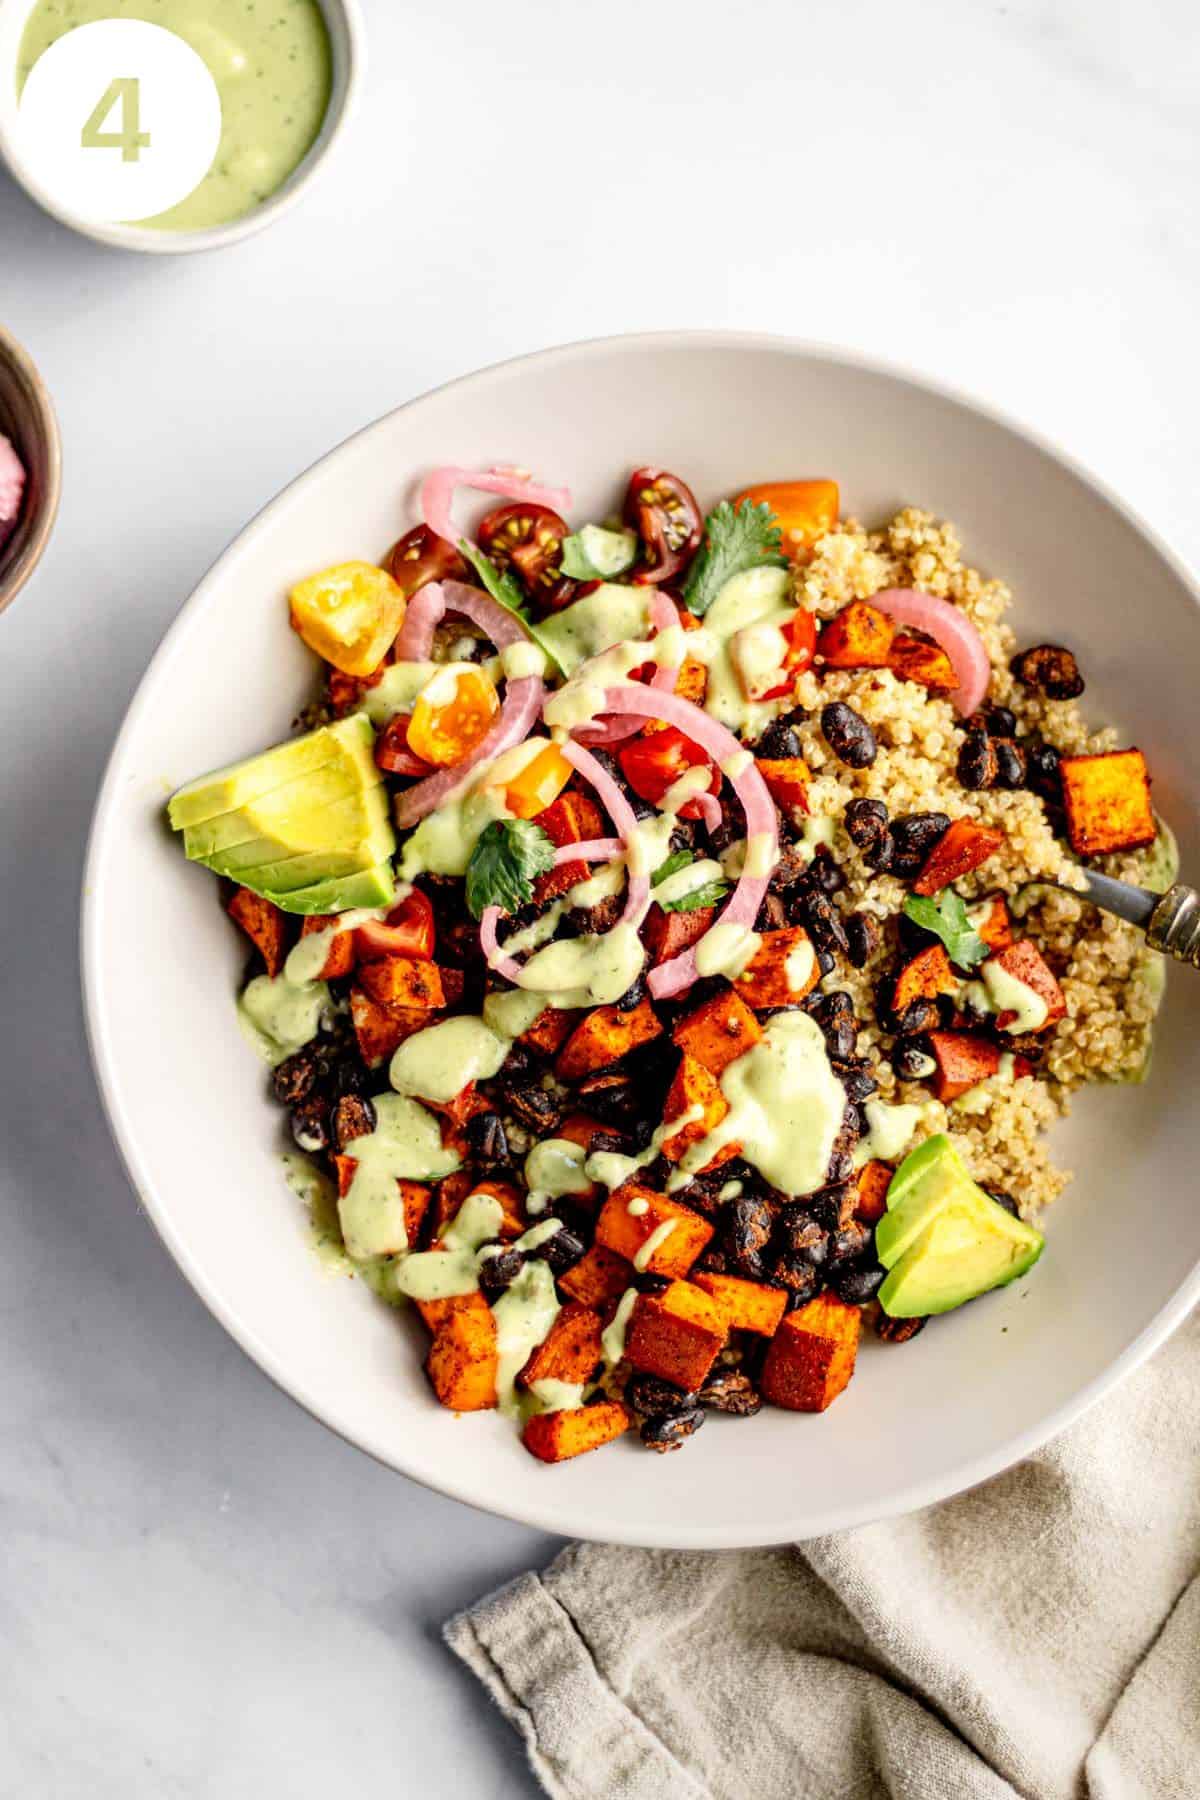 Plated quinoa bowl with sweet potatoes, black beans, avocado dressing, and garnishes. Labeled with a "4" in upper left corner.